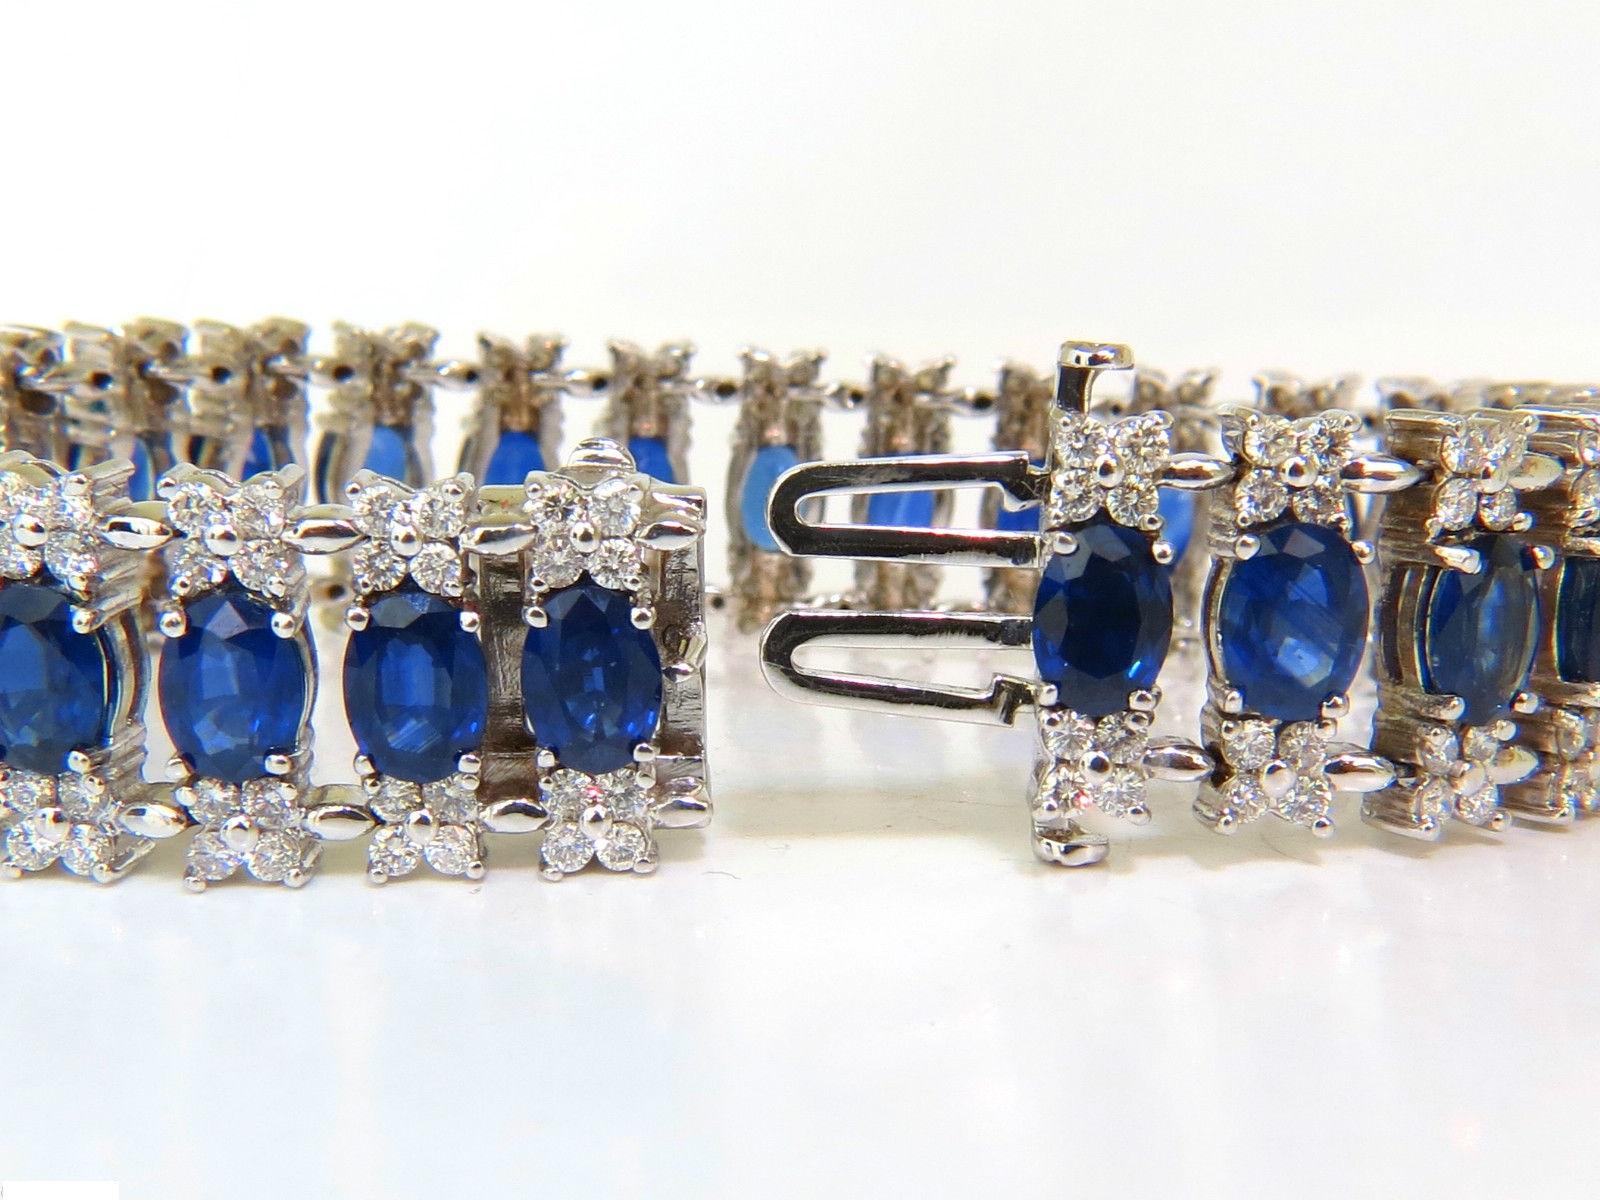 33.75 Carat Natural Gem Sapphire Diamond Bracelet Three-Row and Wide Cuff For Sale 5